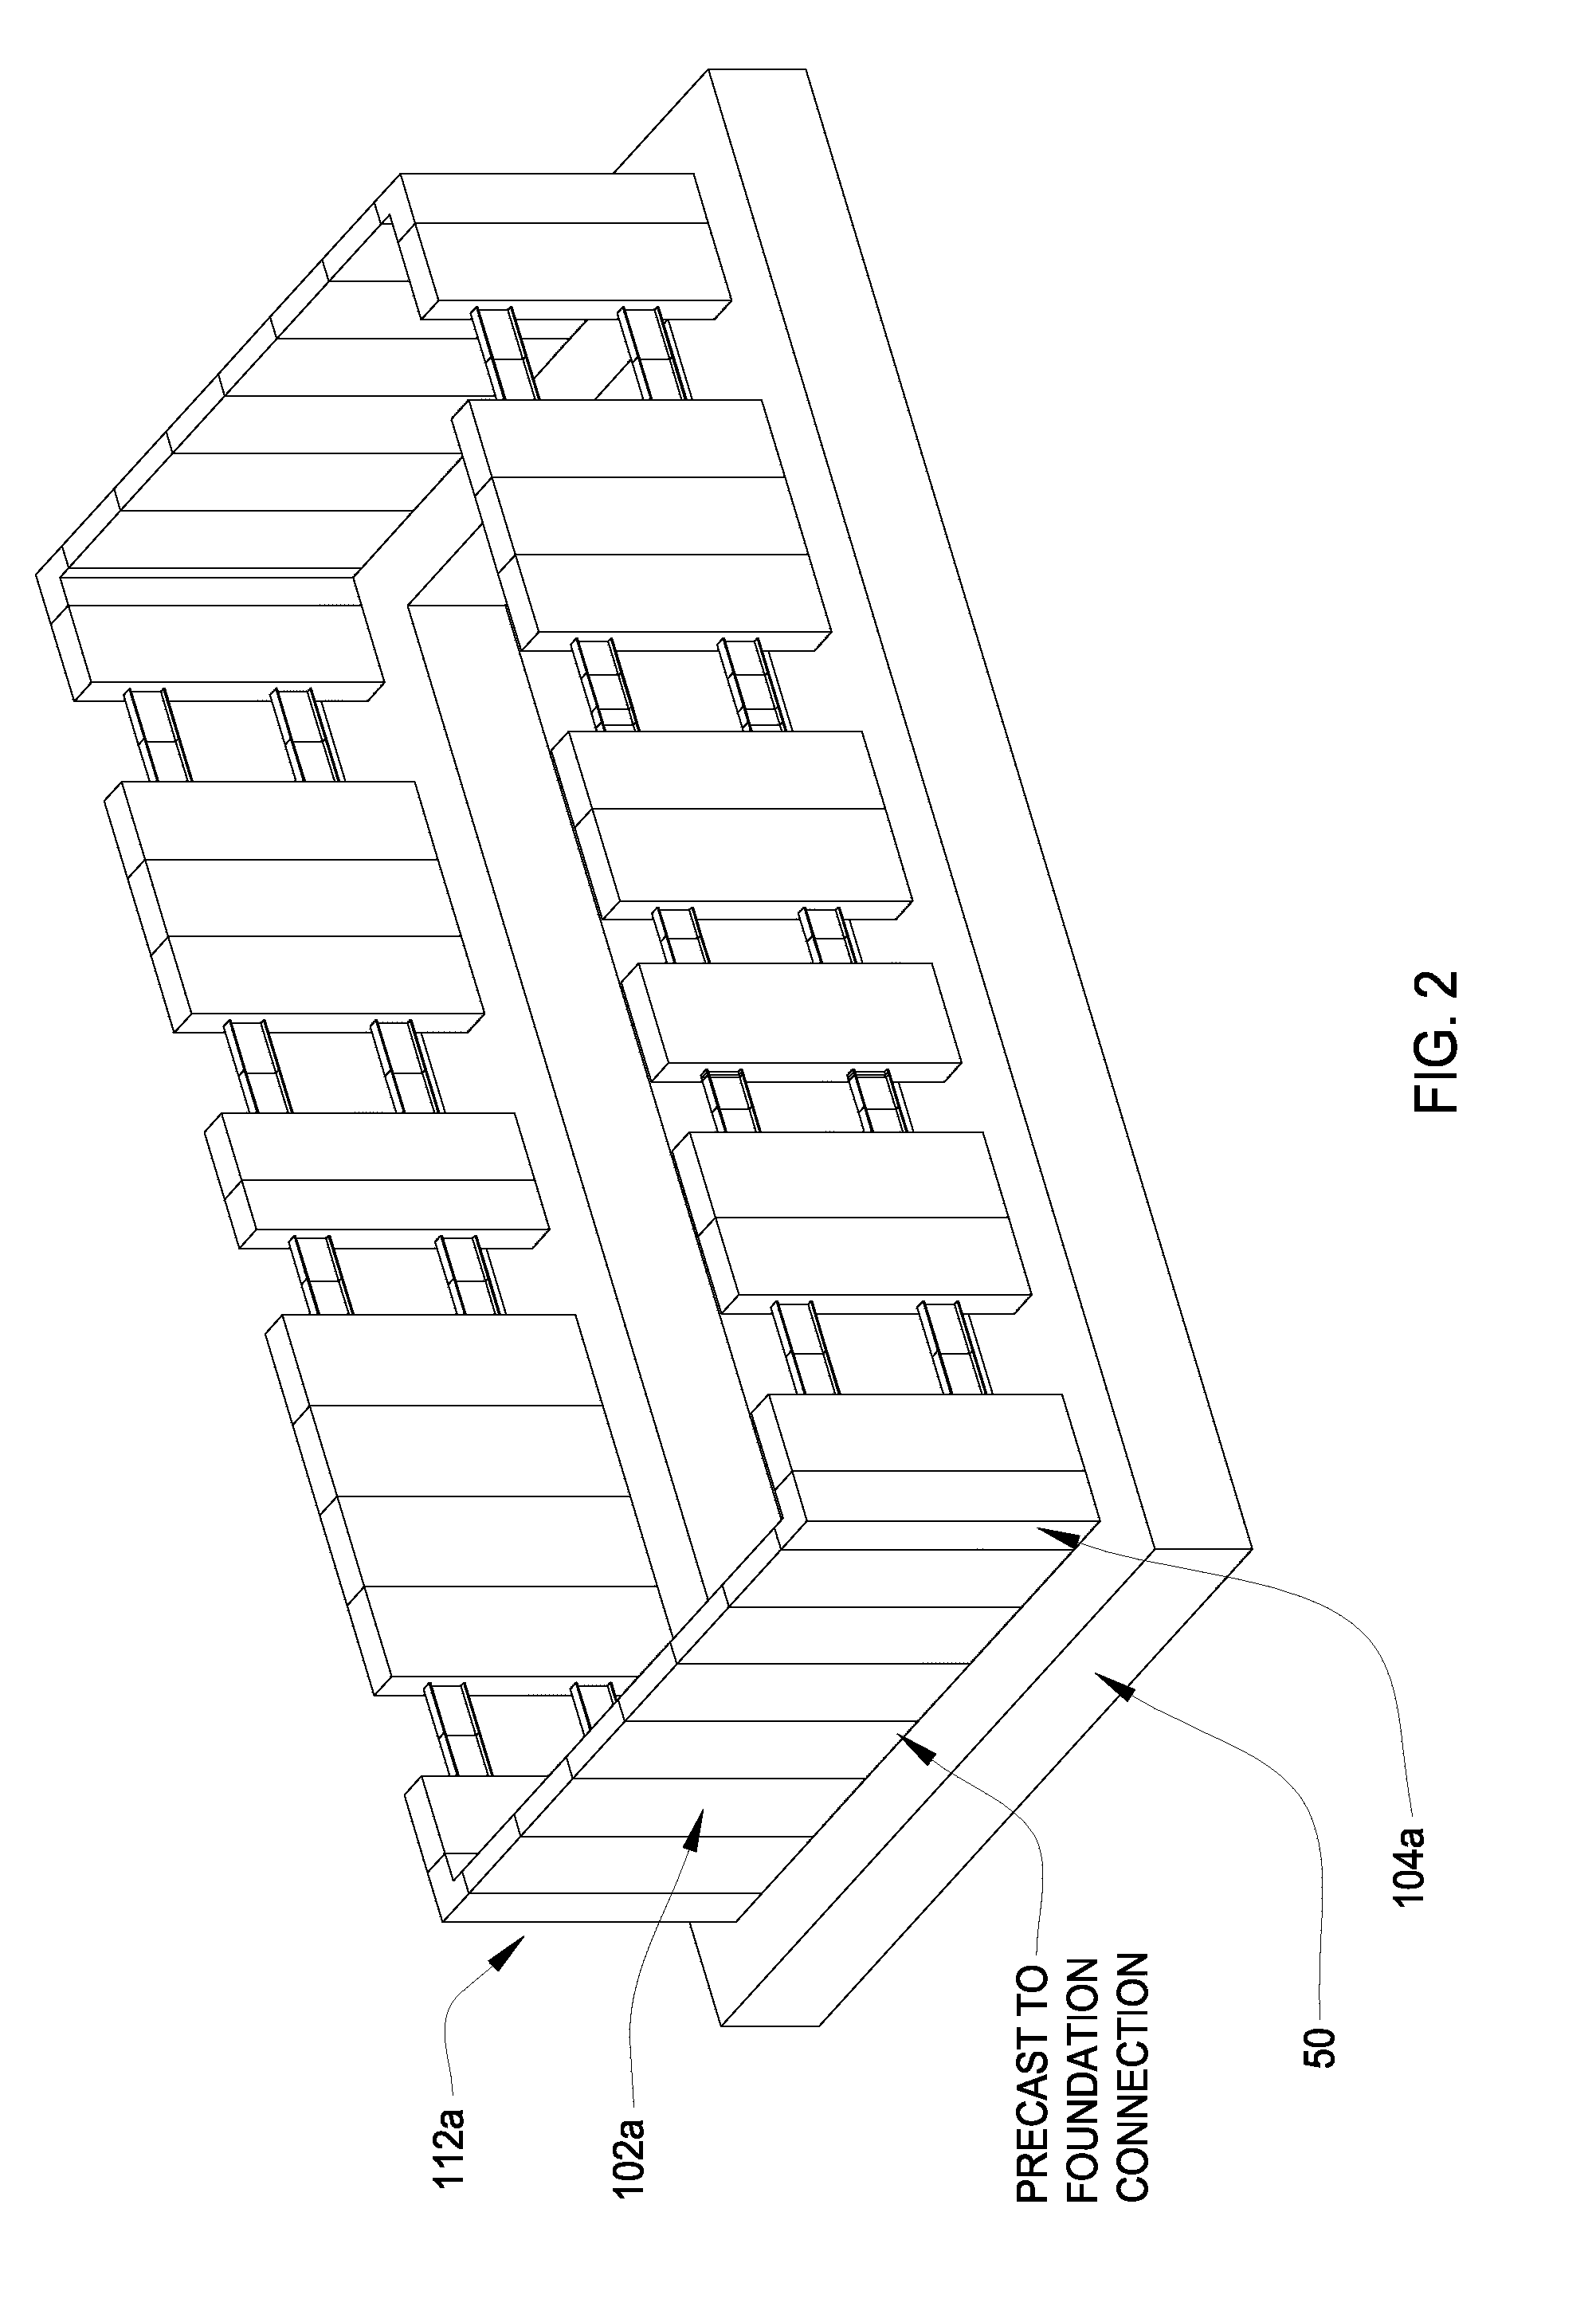 Precast wall panels and method of erecting a high-rise building using the panels